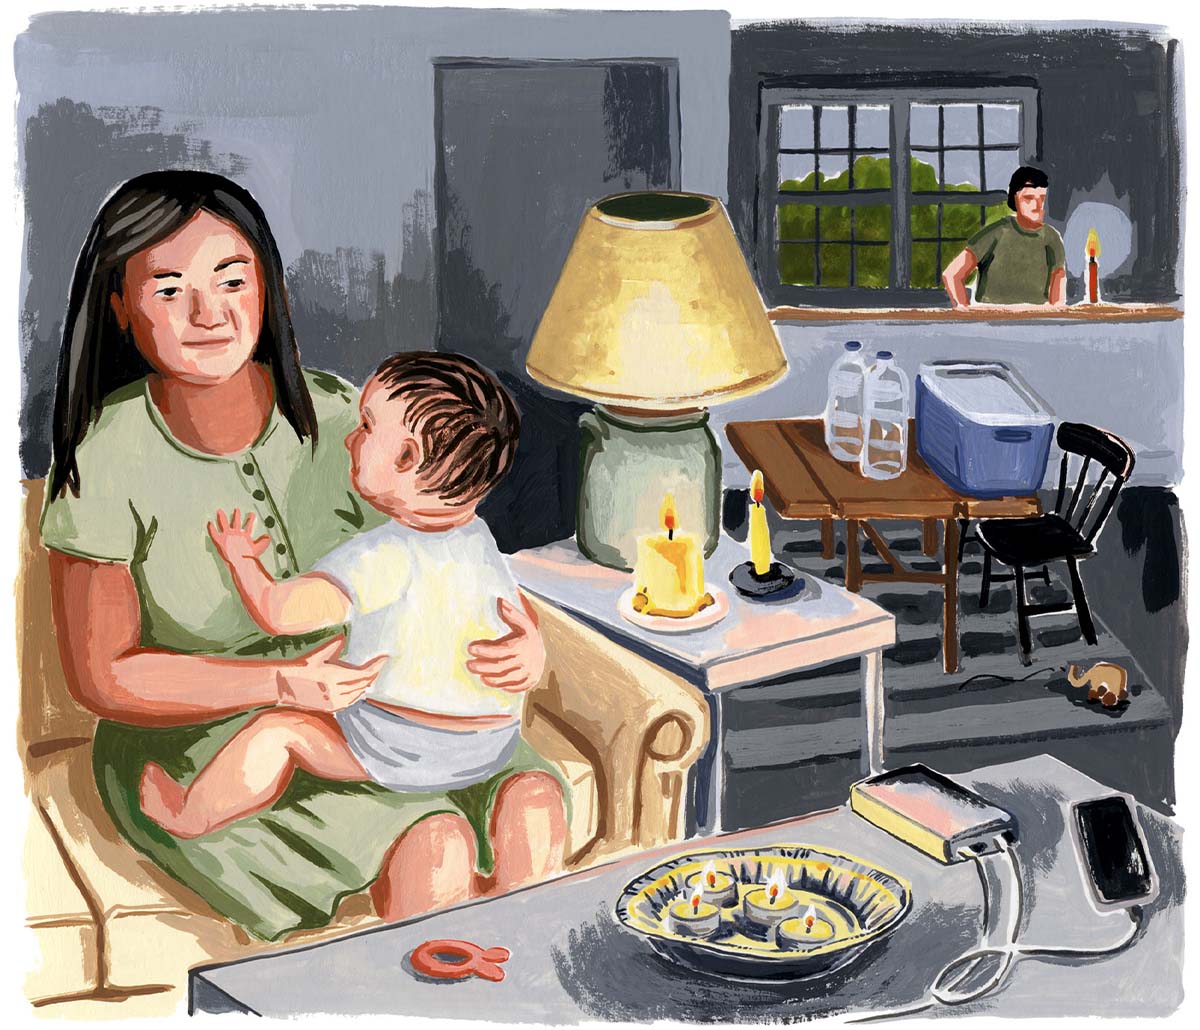 A gouache painting of a family in a candlelit living room during a power outage. A mother holds a baby in her lap while another person stands behind a counter. Phones charging from a power bank, baby toys, and water jugs are scattered across the room.